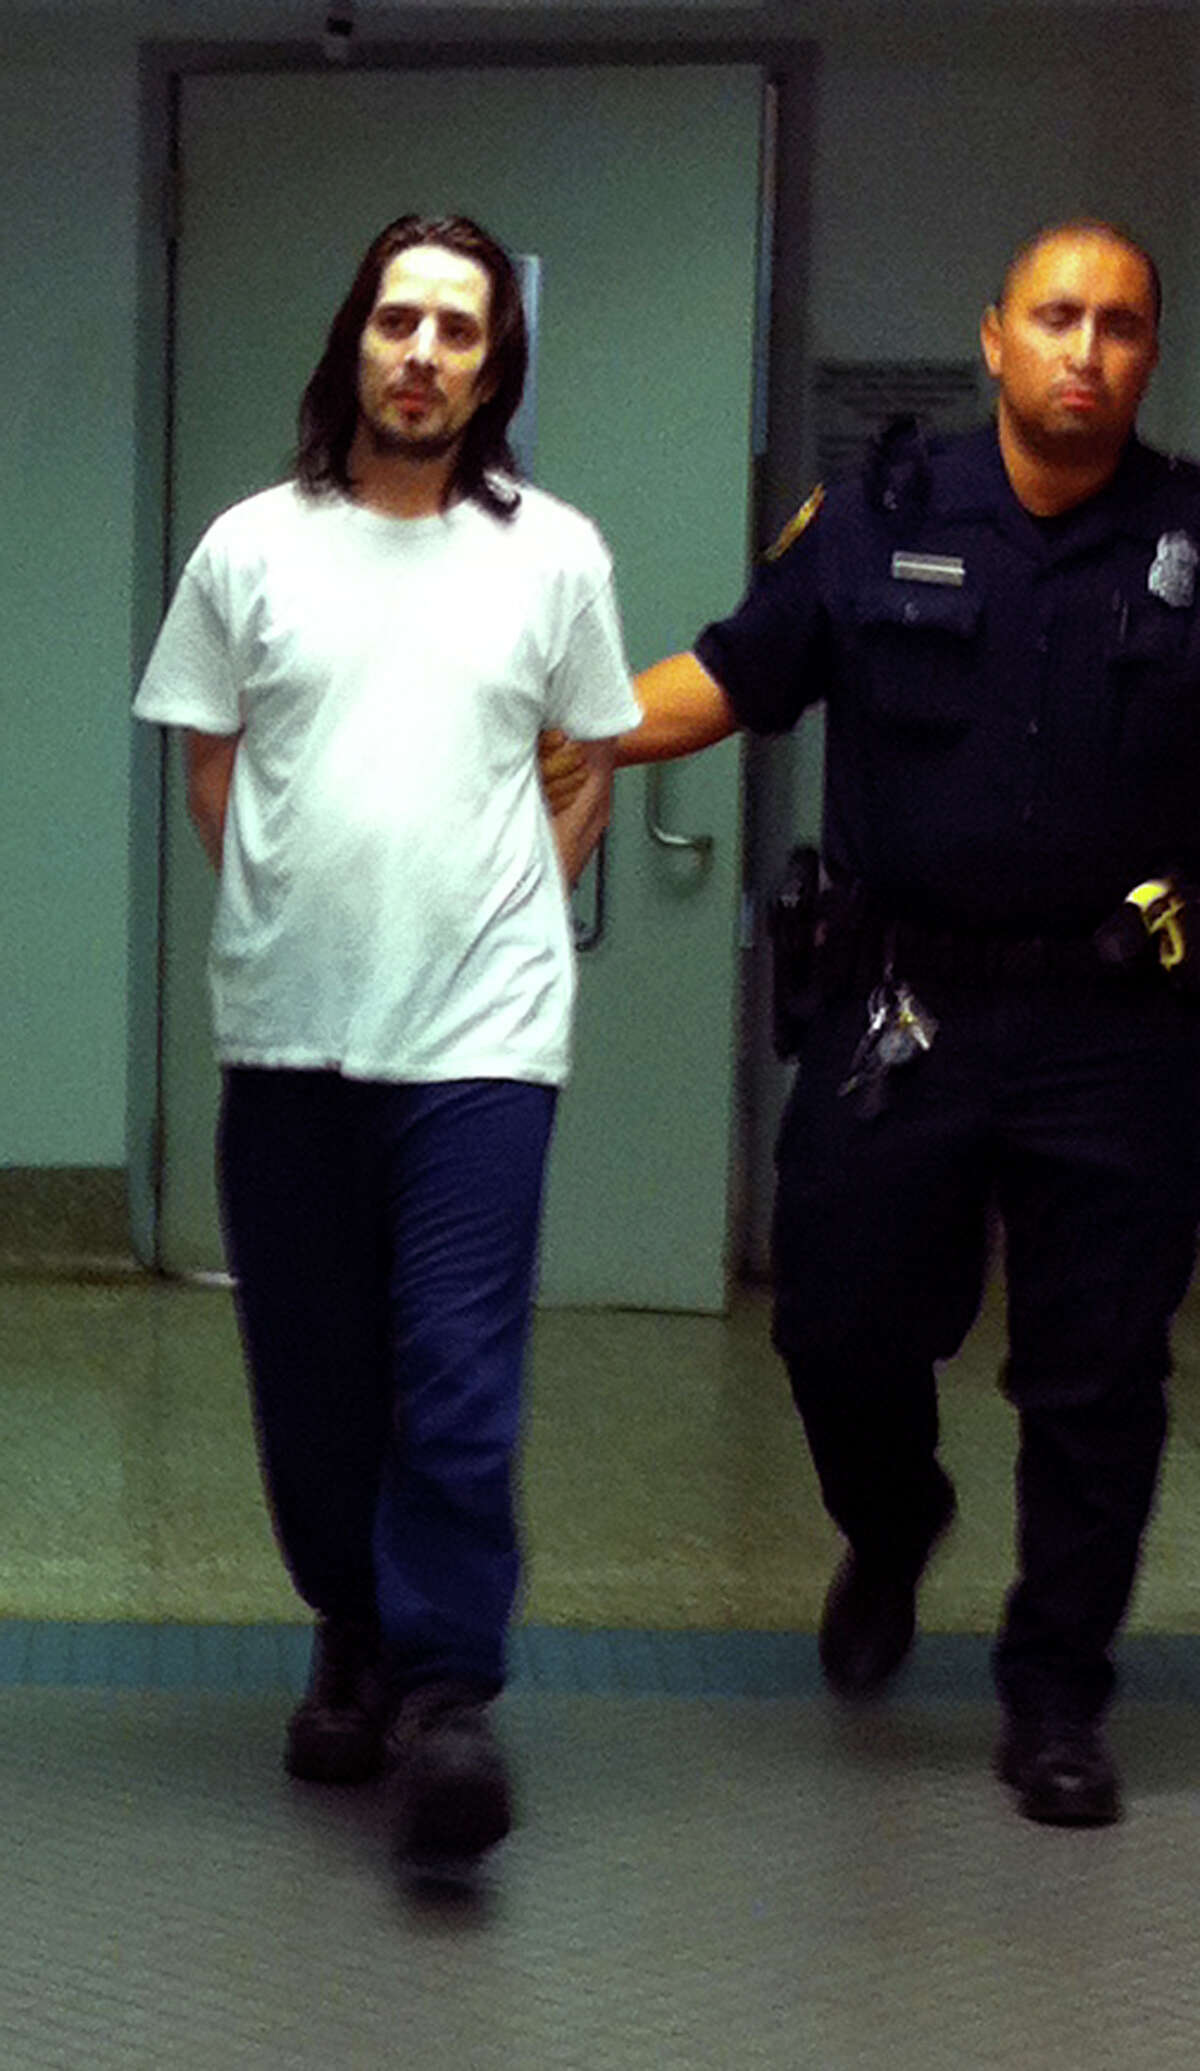 Baron Ochoa after his initial arrest, charged with two counts of continuous sexual abuse of a child. He later was charged with capital murder, but that charge was dismissed under a plea deal and he was sentenced to 55 years in prison.